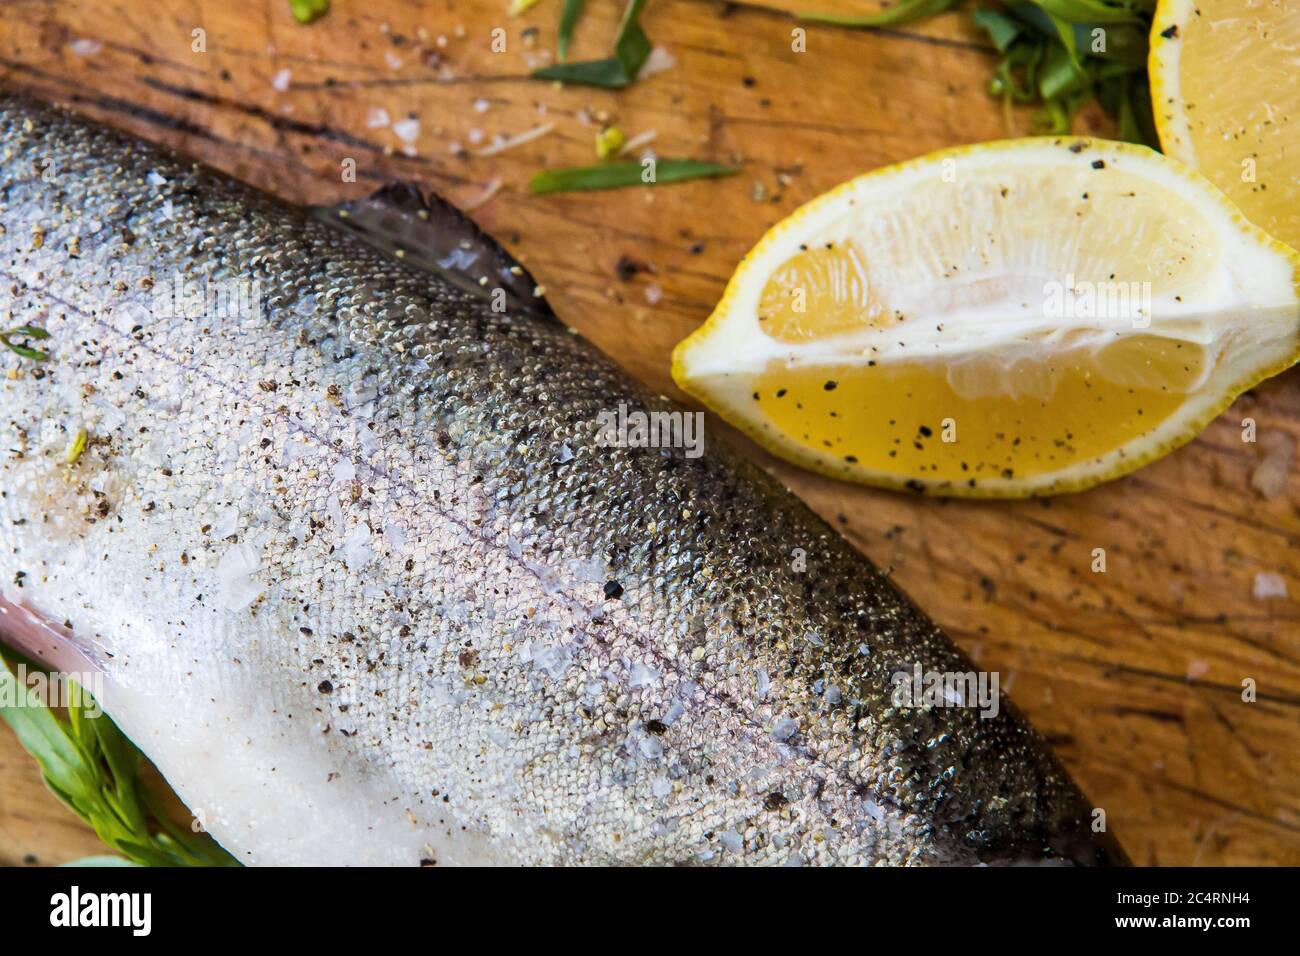 Prepping trout stuffed with tarragon recipe Stock Photo